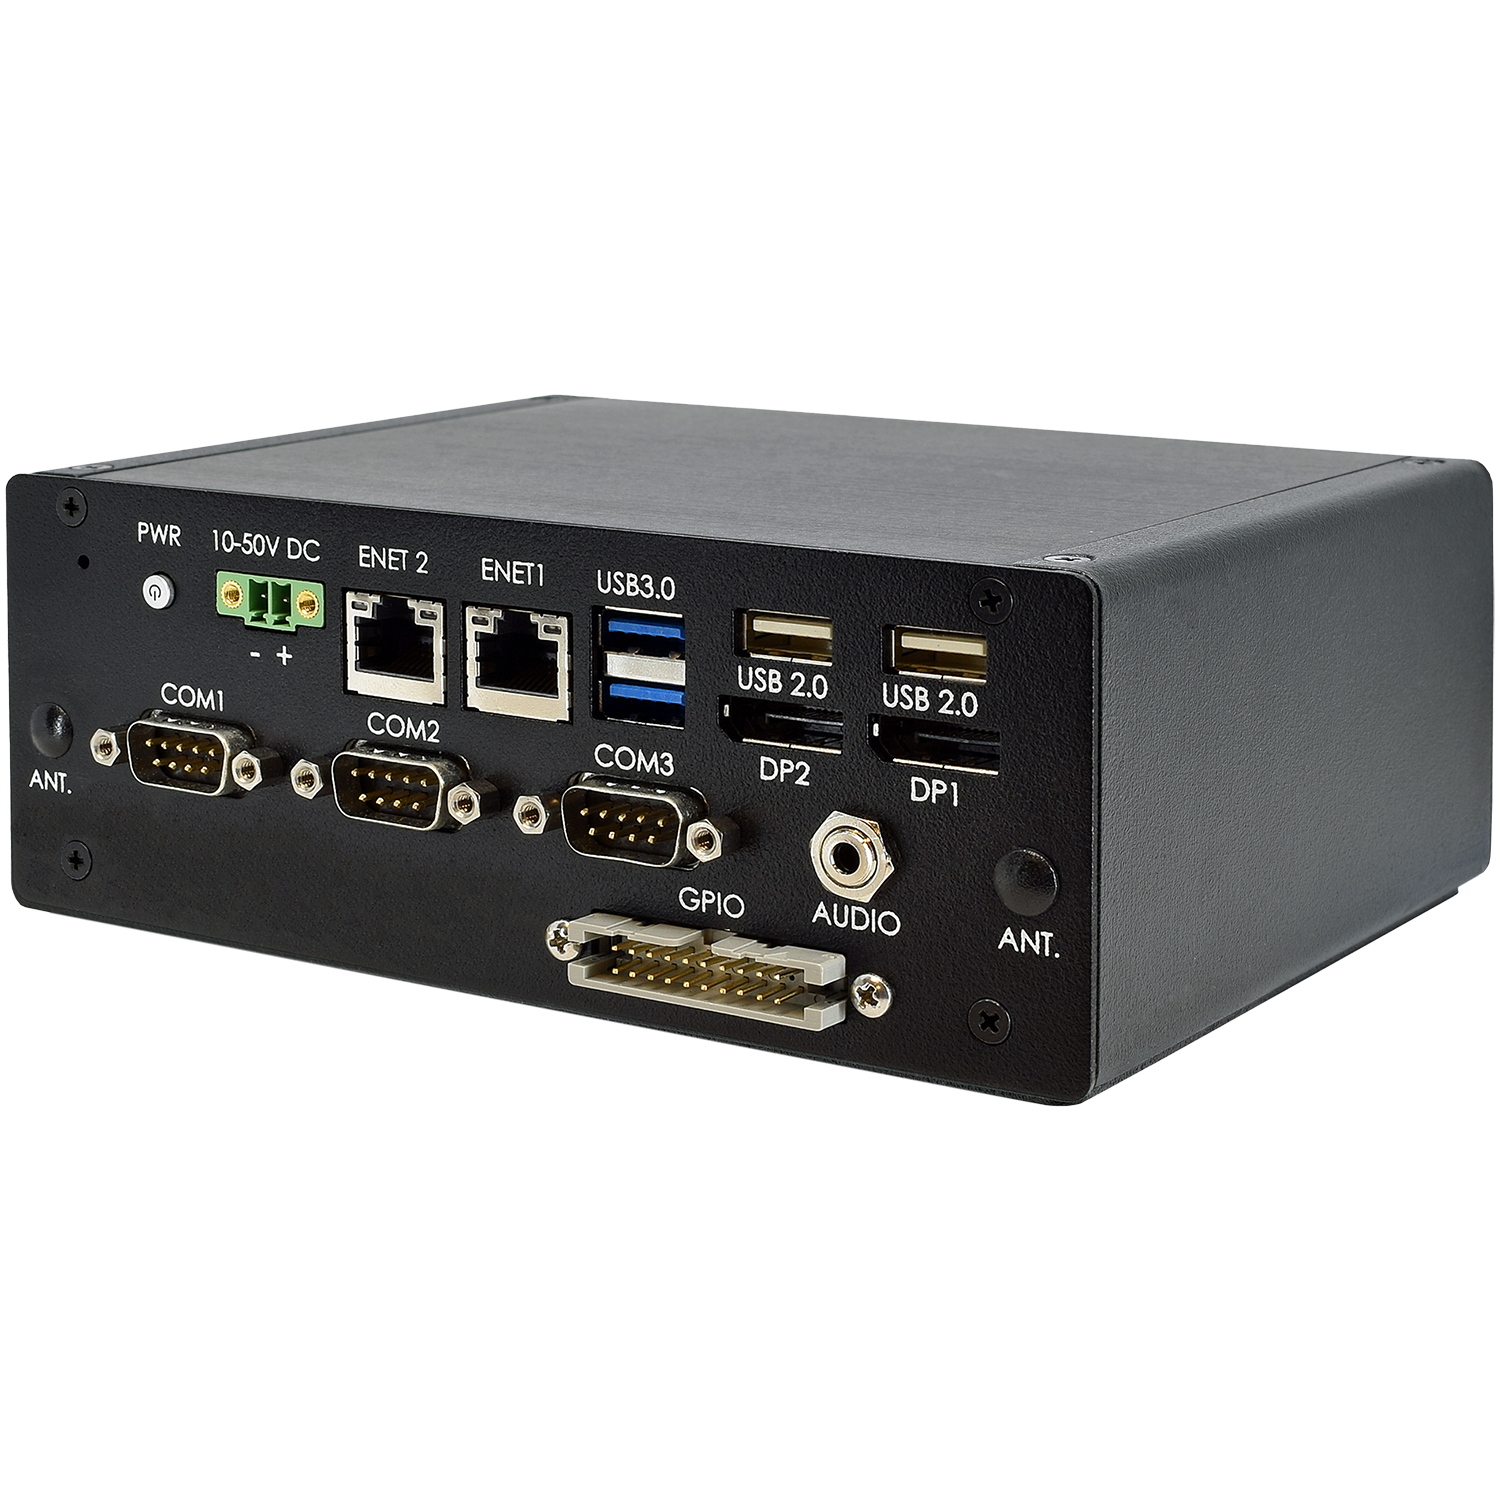 SYS-427X fanless industrial computer with the Intel® Apollo Lake-I SOC quad-core processor.